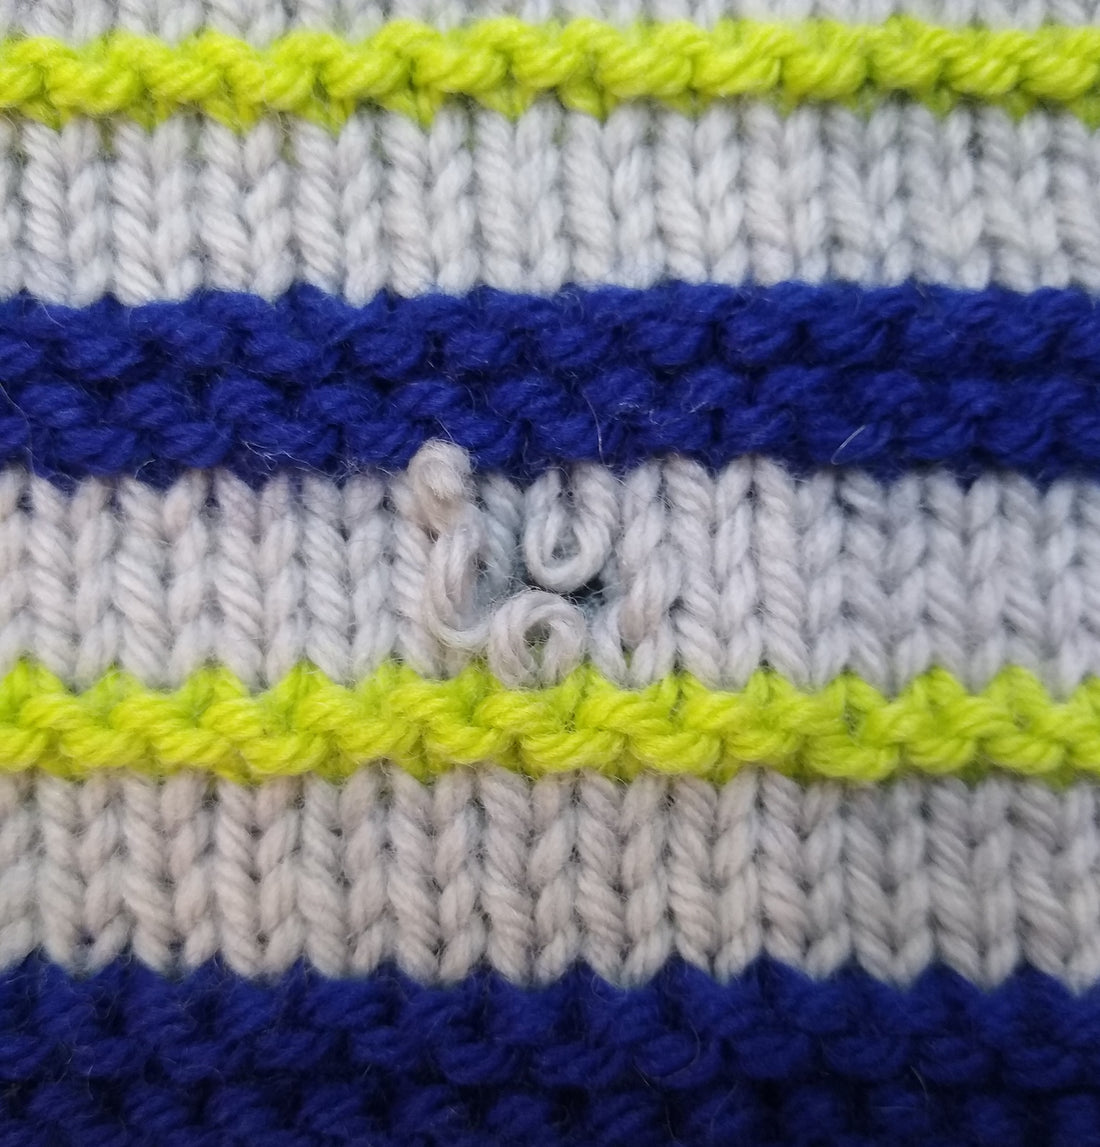 Specialty Knitting Class: Fixing Errors